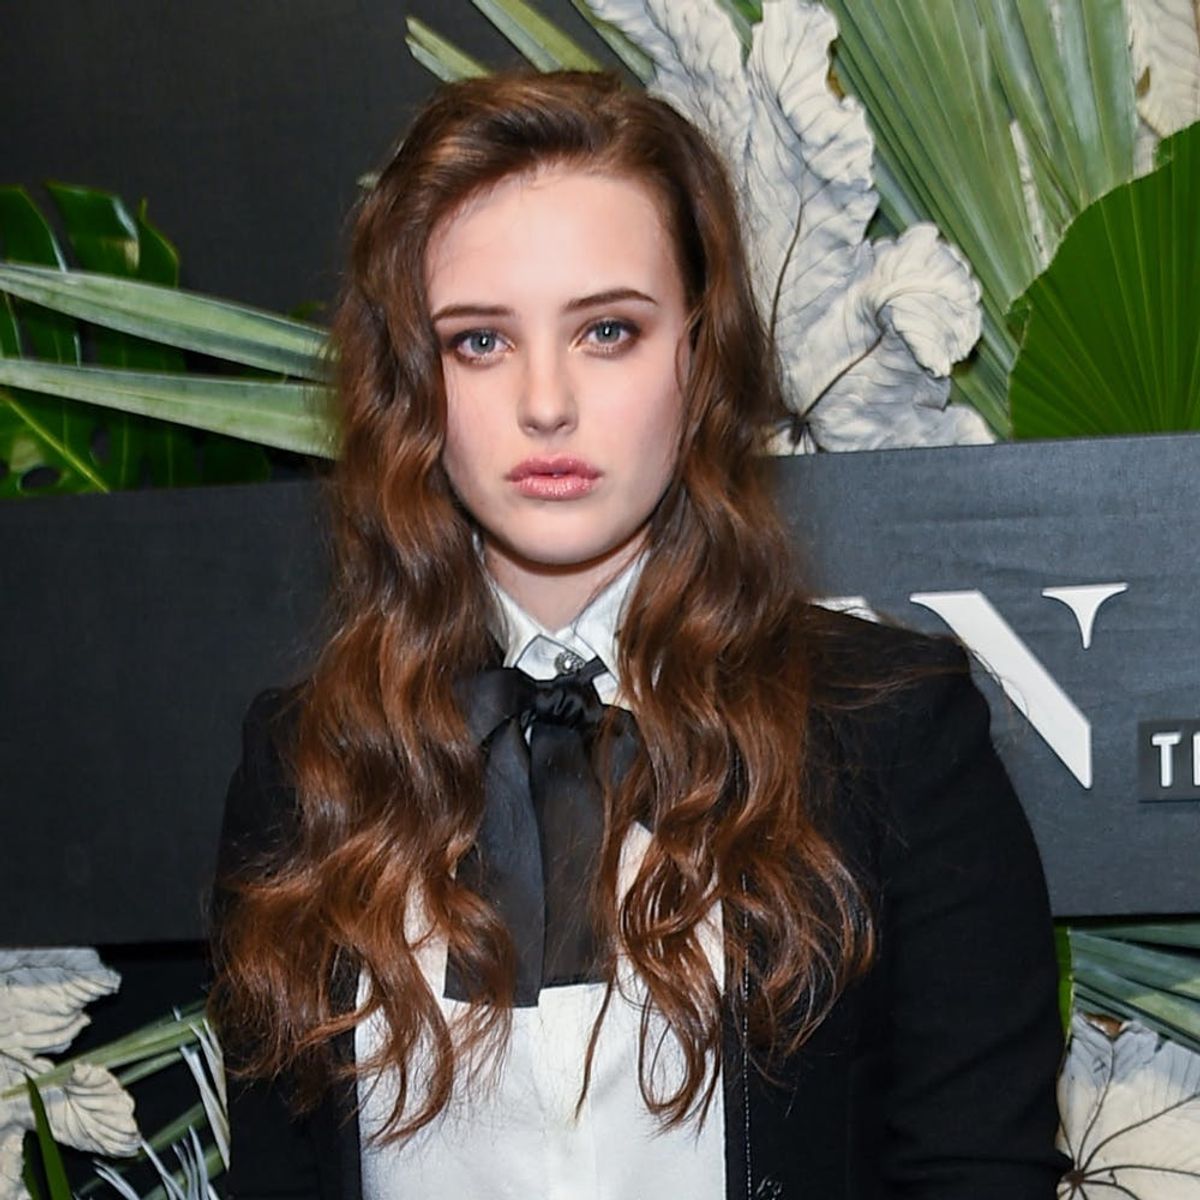 How the Star of  “13 Reasons Why” Dealt With Her Emotional Role